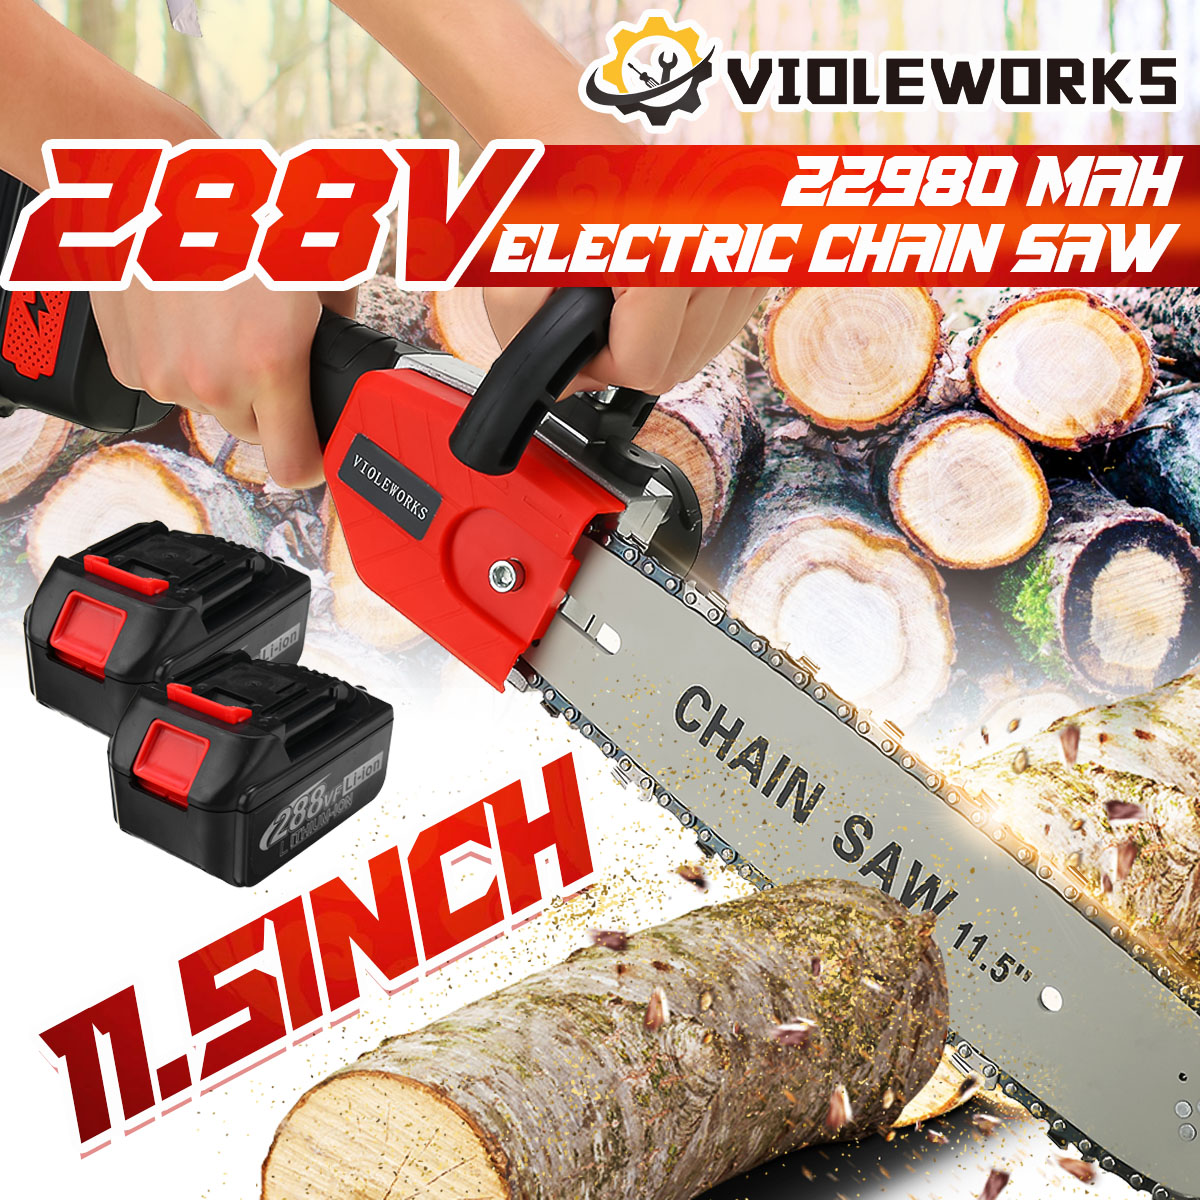 288VF-12-3200W-Electric-Chain-Saw-Cordless-One-Hand-Saw-Woodworking-Tool-W-None12pcs-Battery-1854124-1